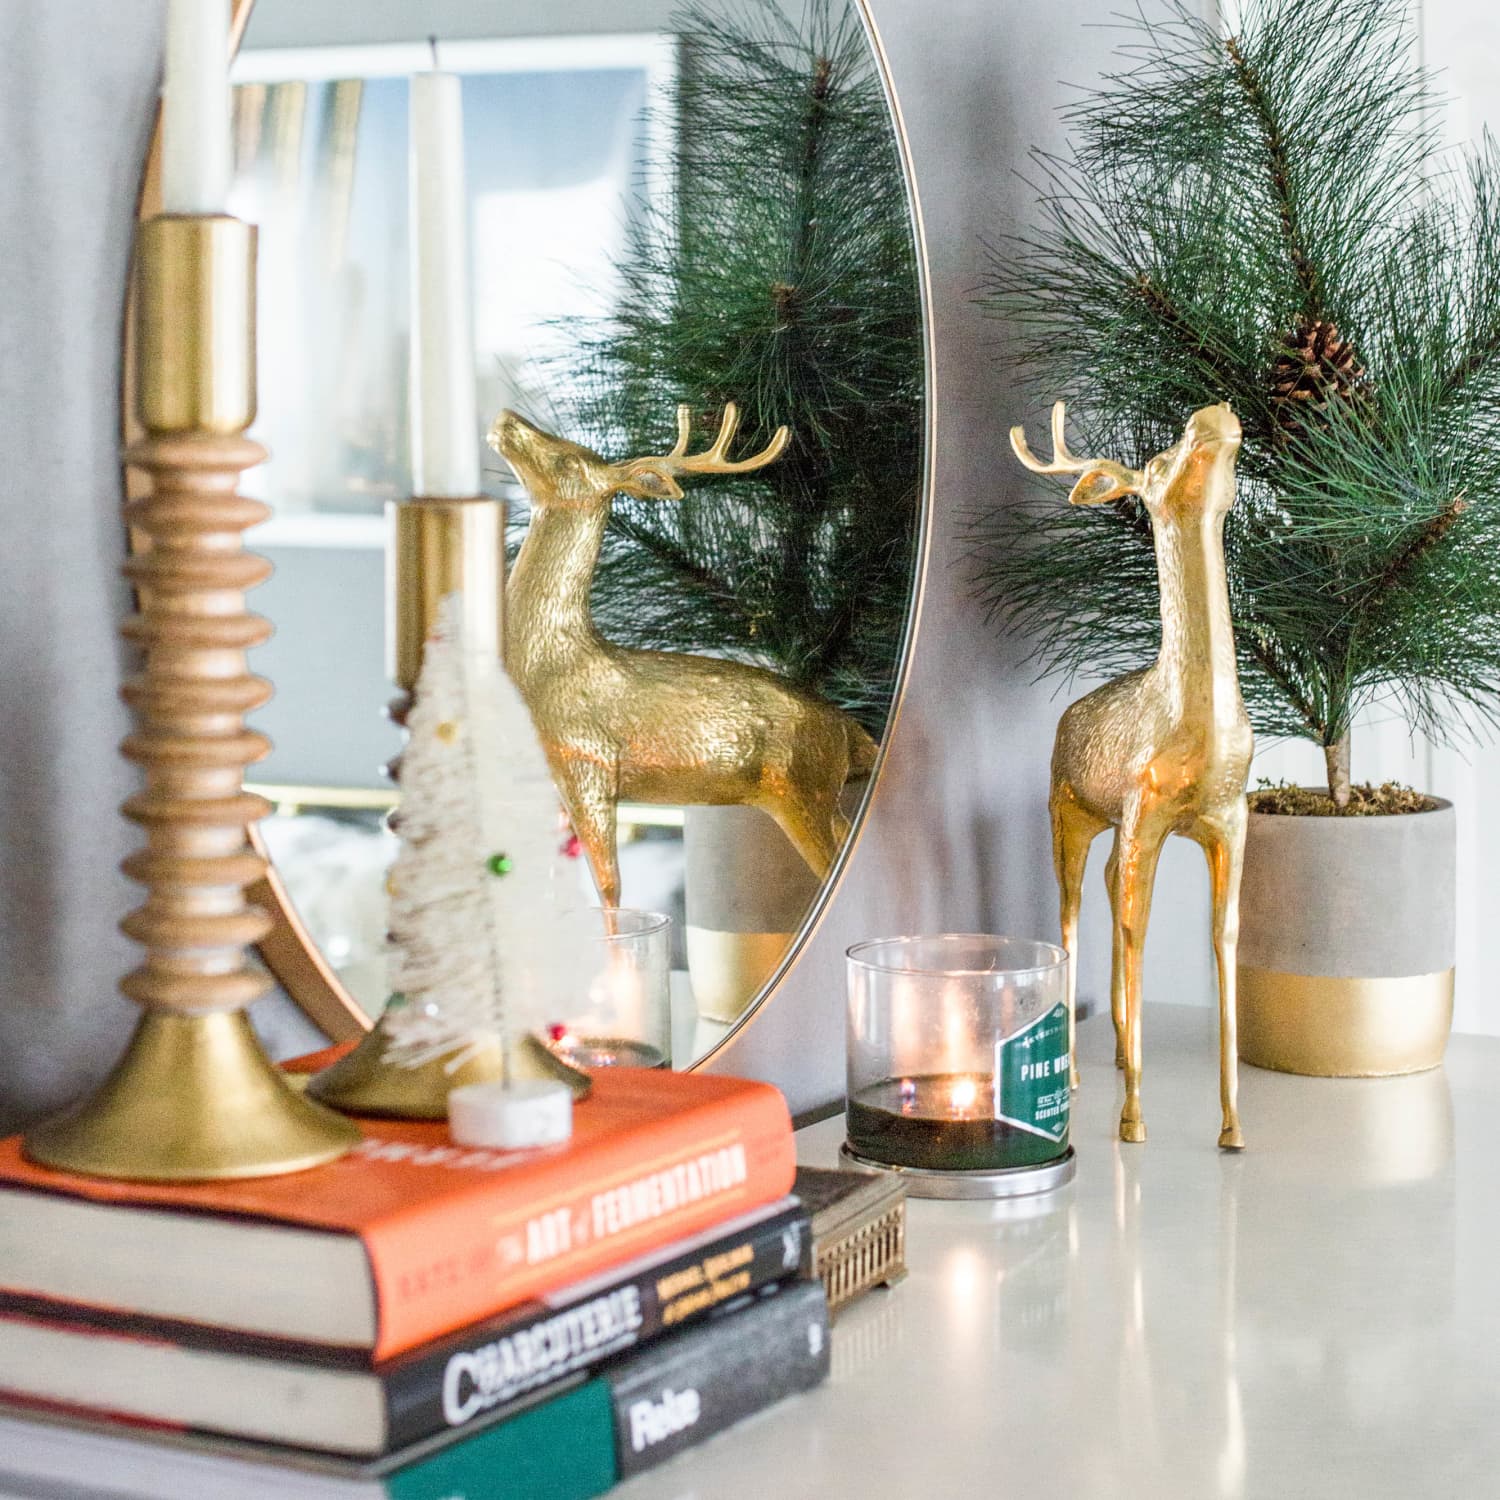 23 Christmas Decor Ideas for Small Spaces & Apartments | Apartment ...